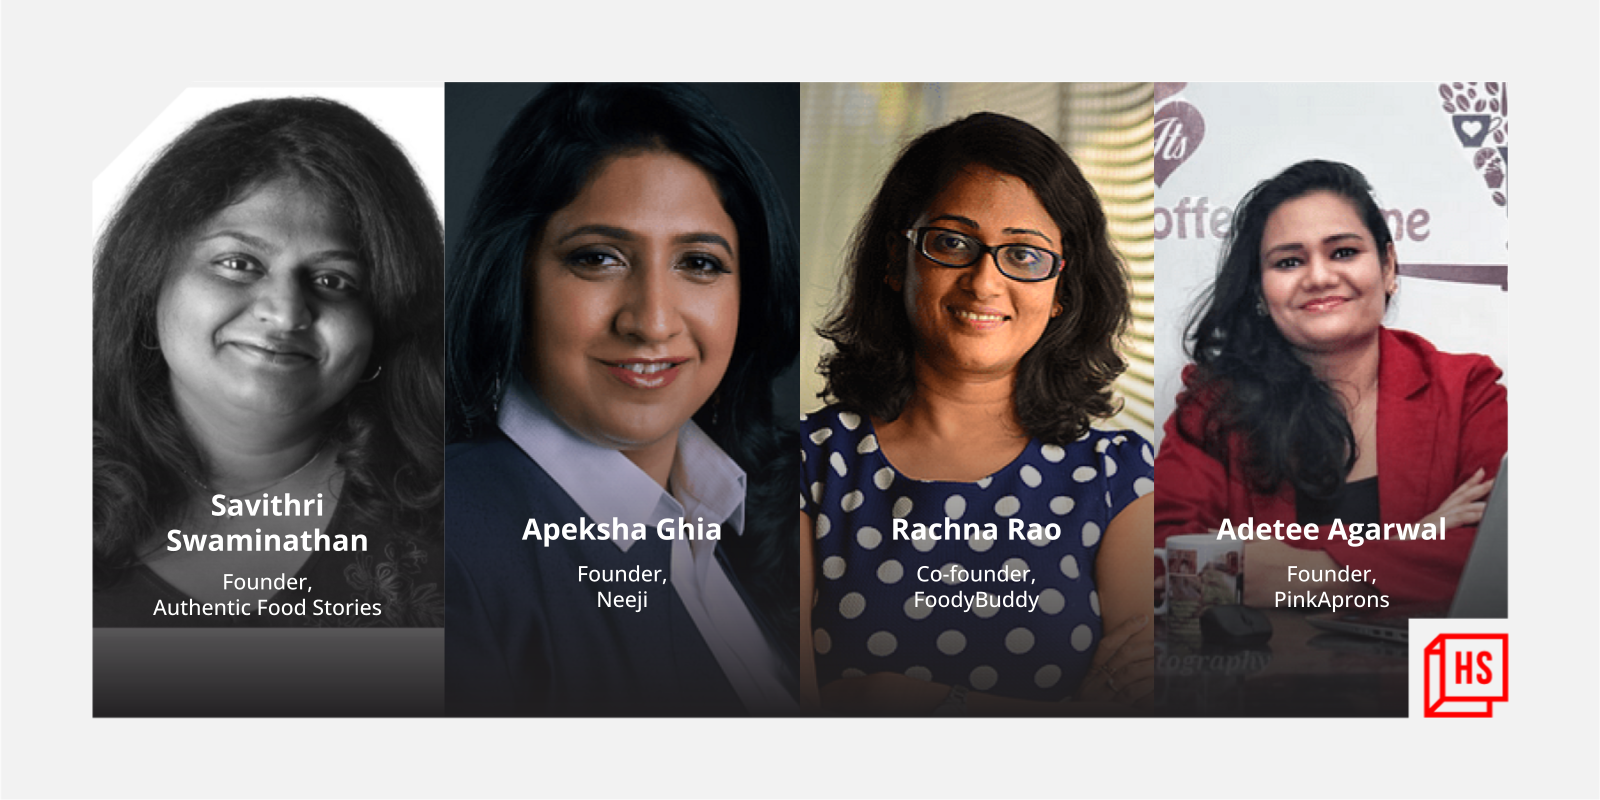 Meet 4 women entrepreneurs who are empowering home chefs across India
